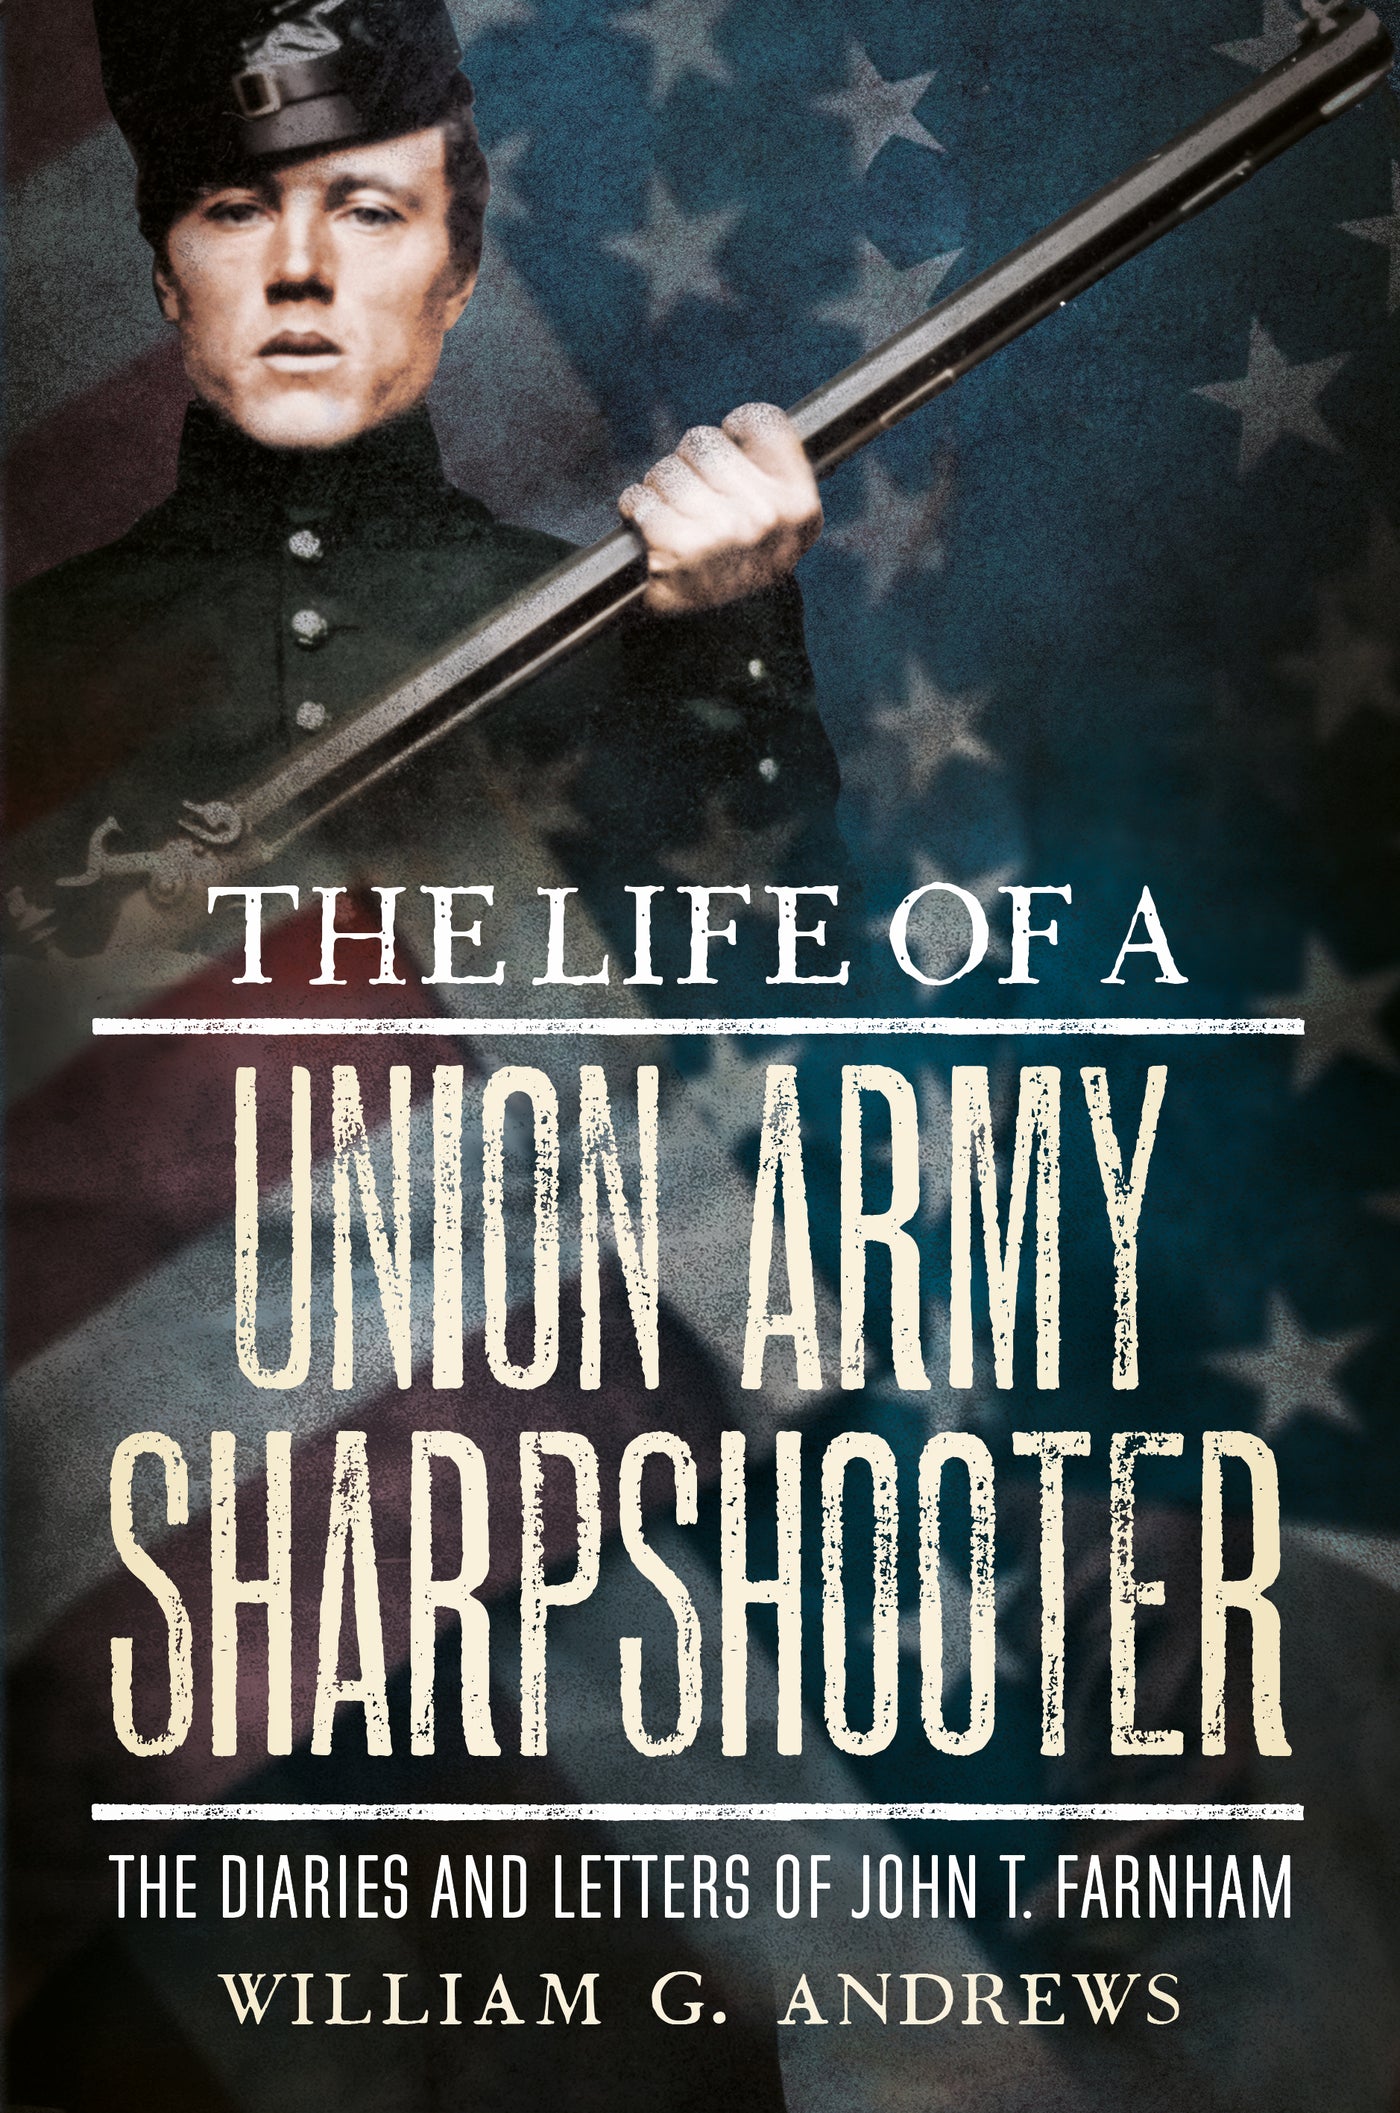 The Life of a Union Army Sharpshooter